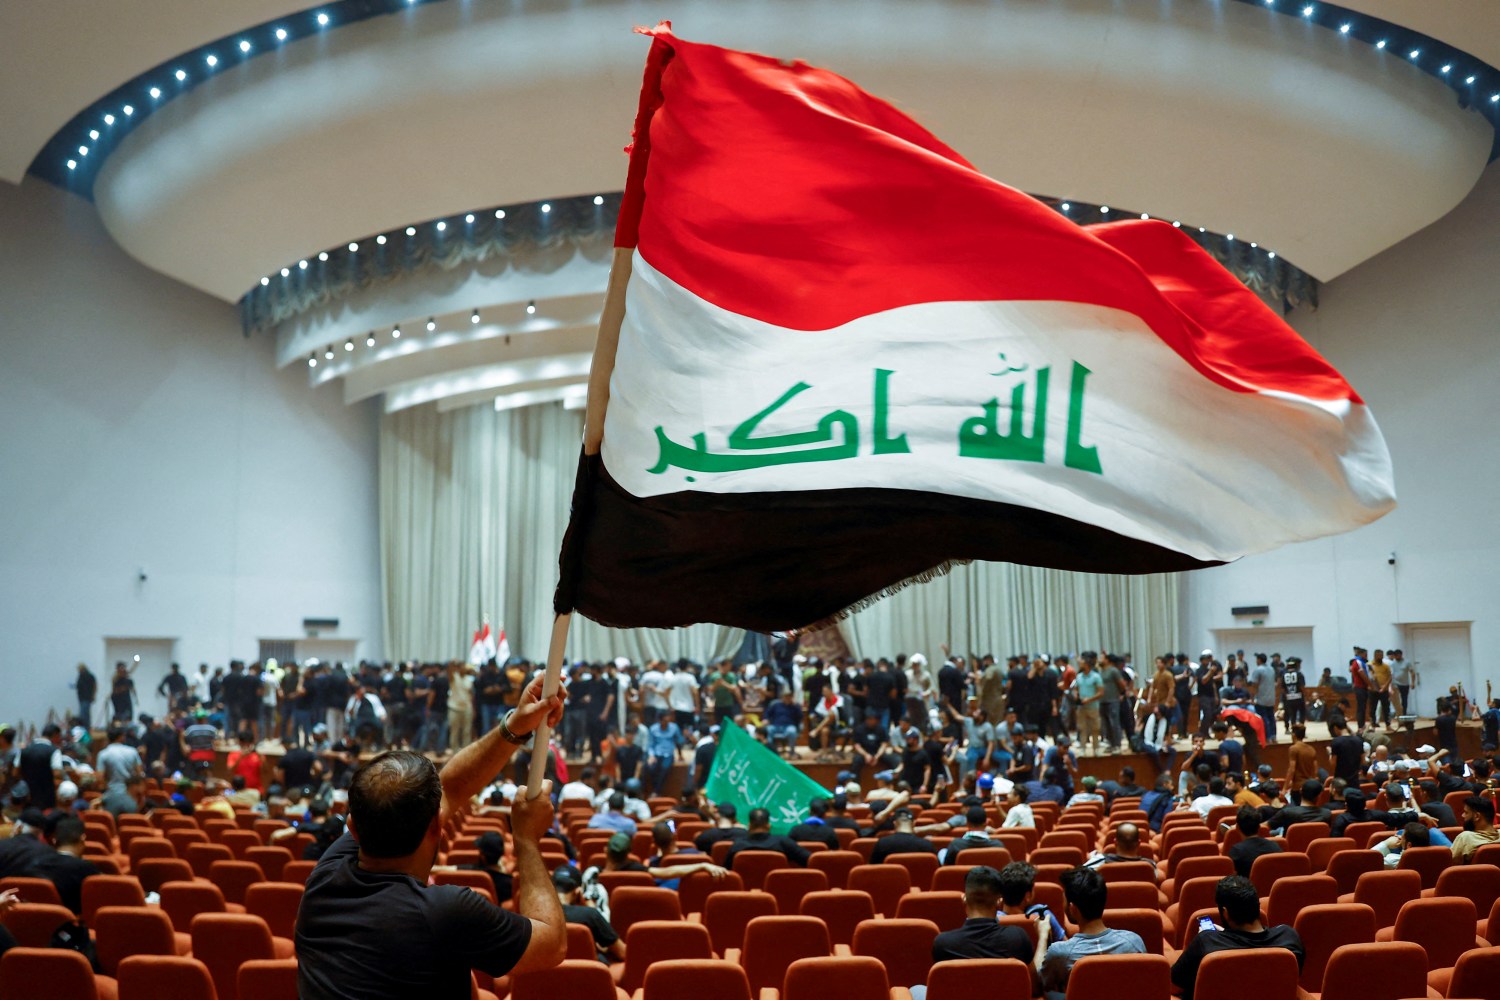 Supporters of Iraqi Shi'ite cleric Moqtada al-Sadr protest against corruption, inside the parliament in Baghdad, Iraq July 30, 2022. REUTERS/Thaier Al-Sudani      TPX IMAGES OF THE DAY